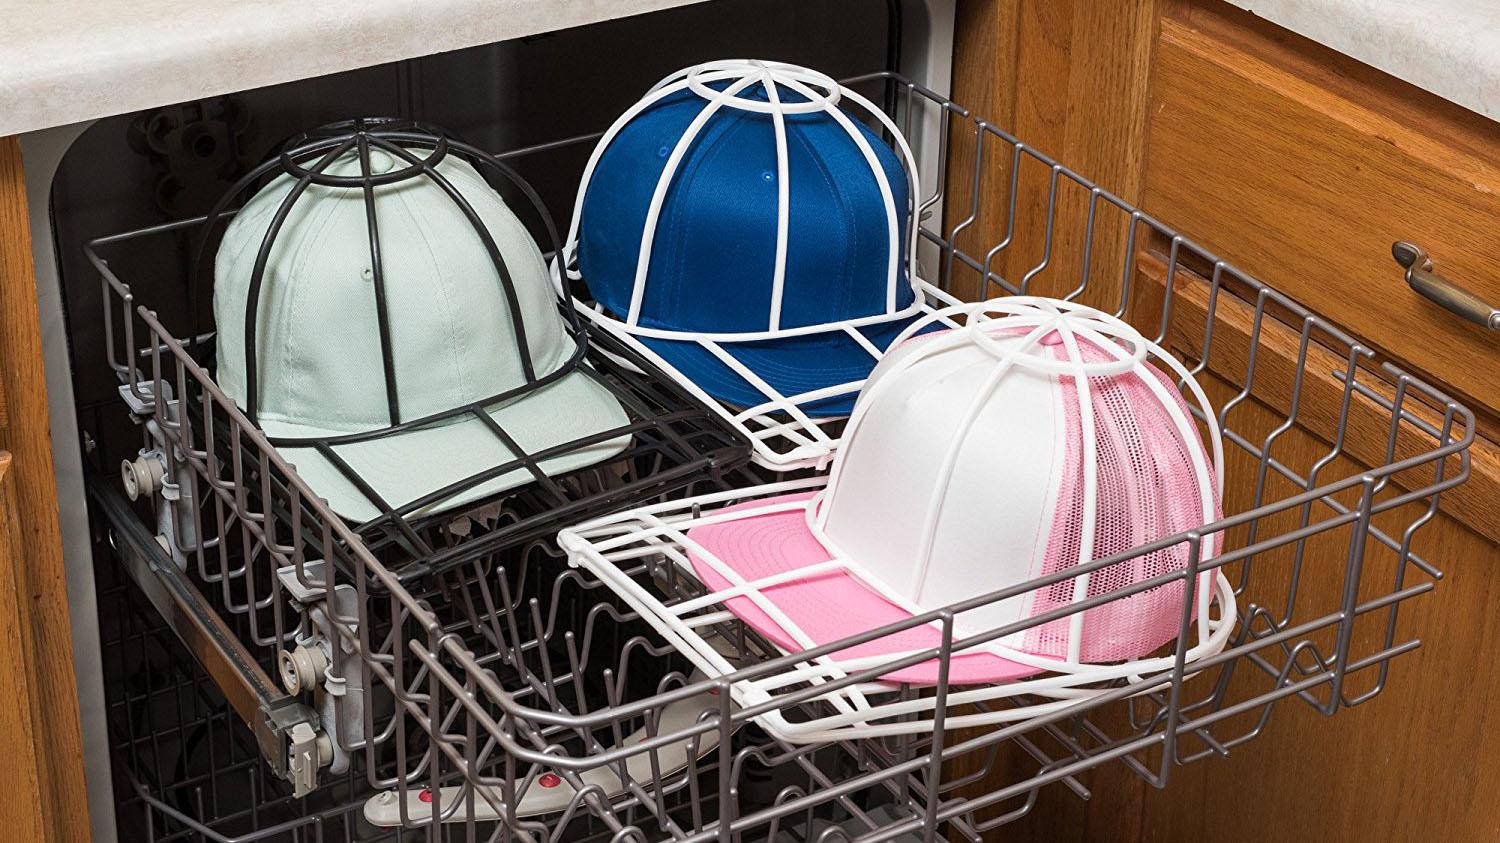 How To Wash Hats In The Dishwasher